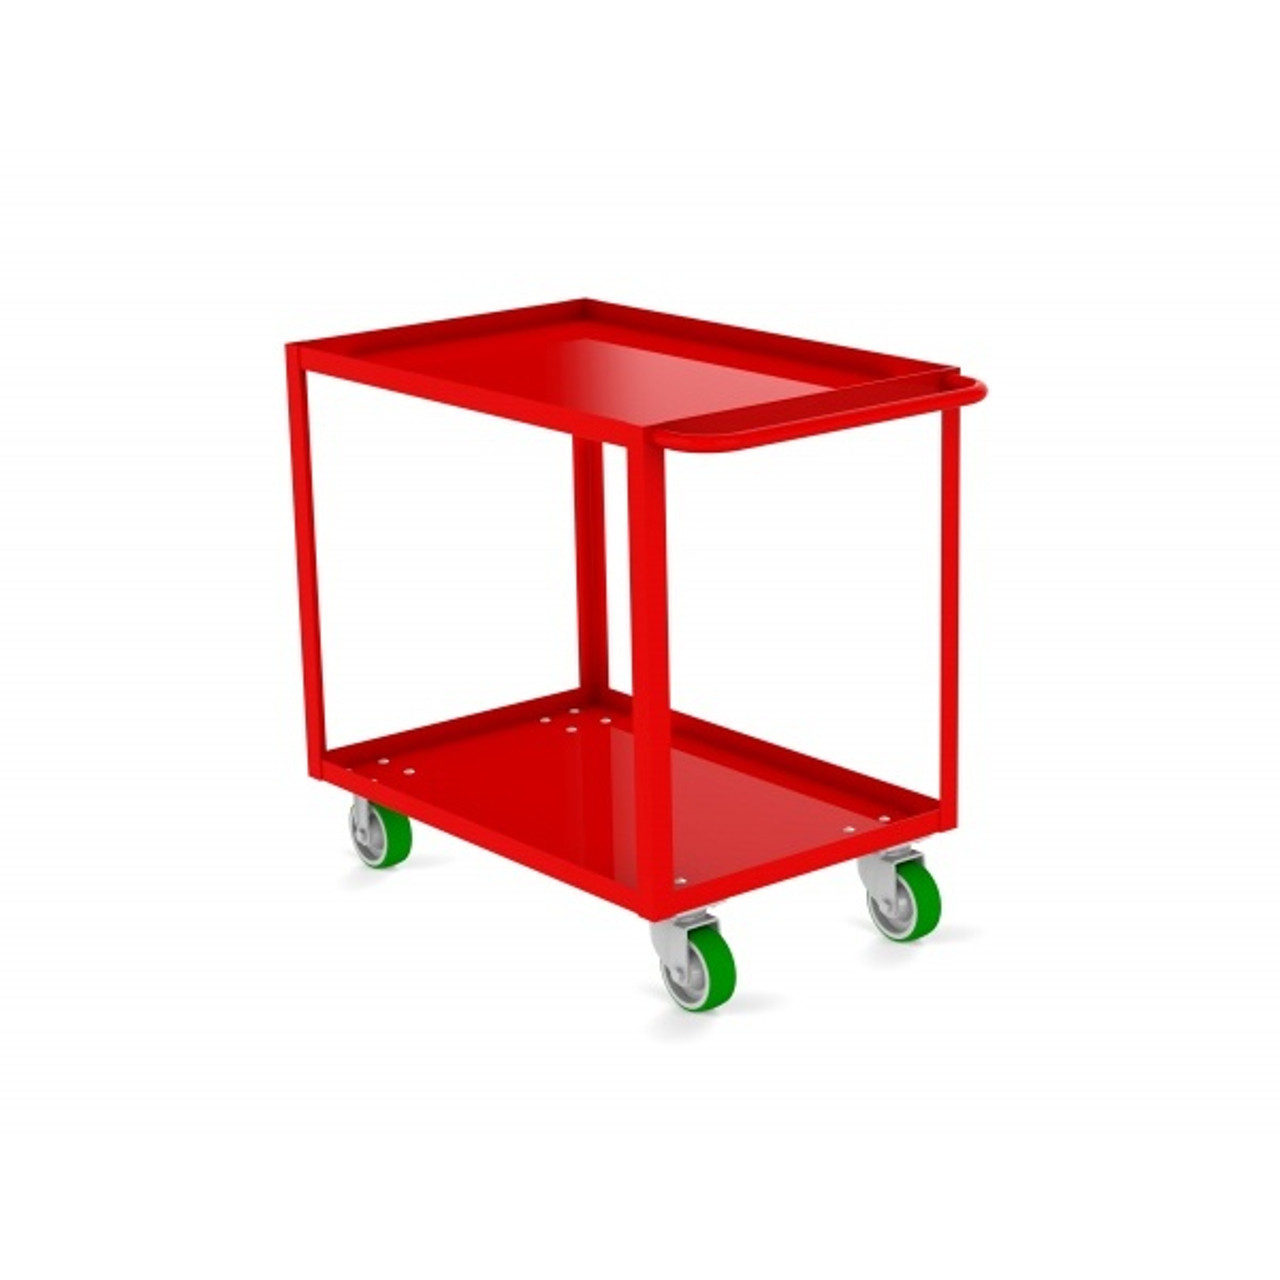 Valley Craft Two Shelf 18 x 36" Utility Cart, Red with Poly Casters(CALL FOR BEST PRICING)